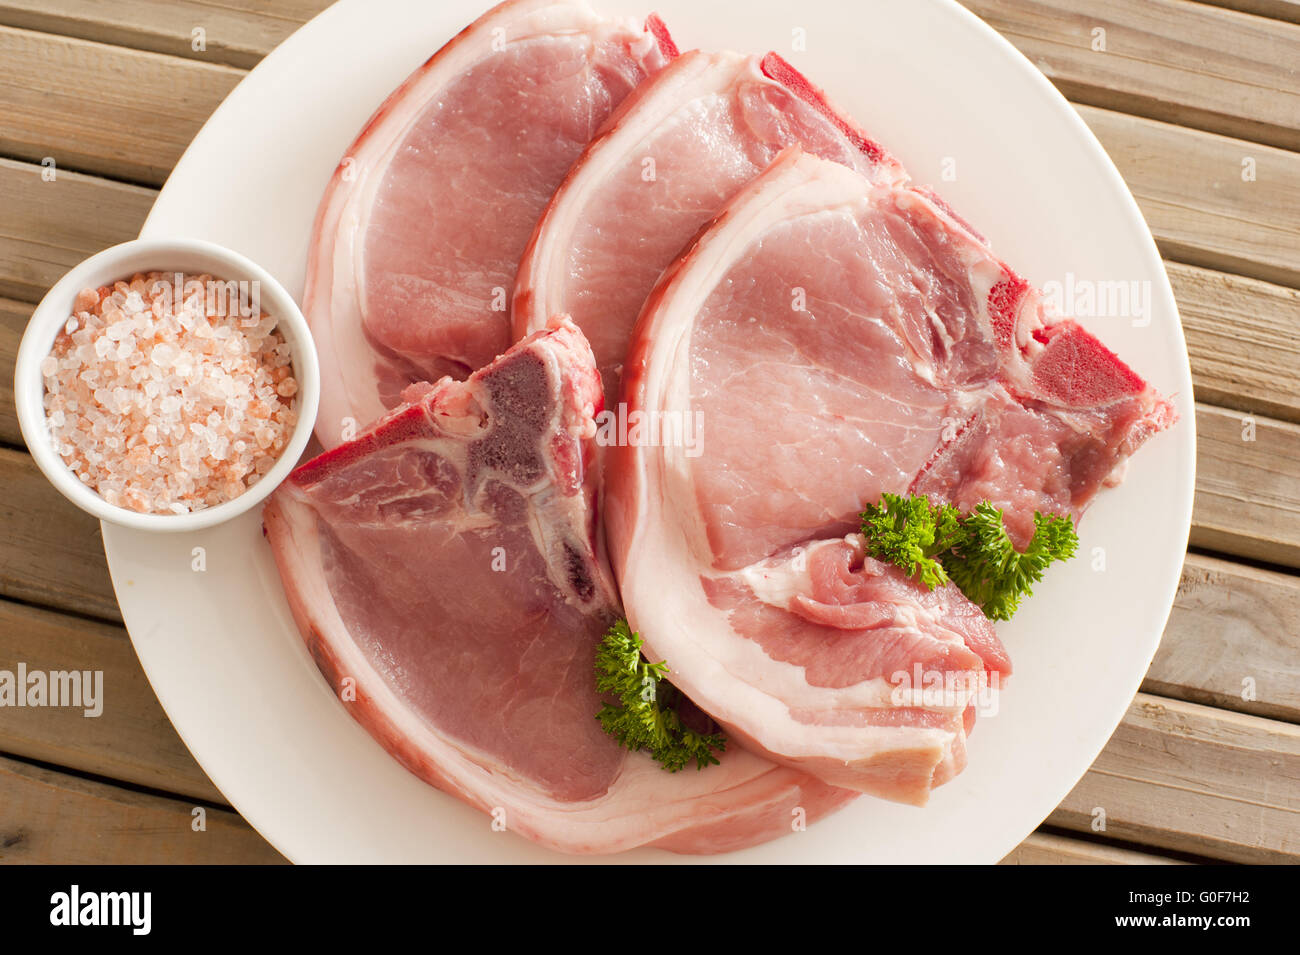 Raw pork cutlets with their rind Stock Photo